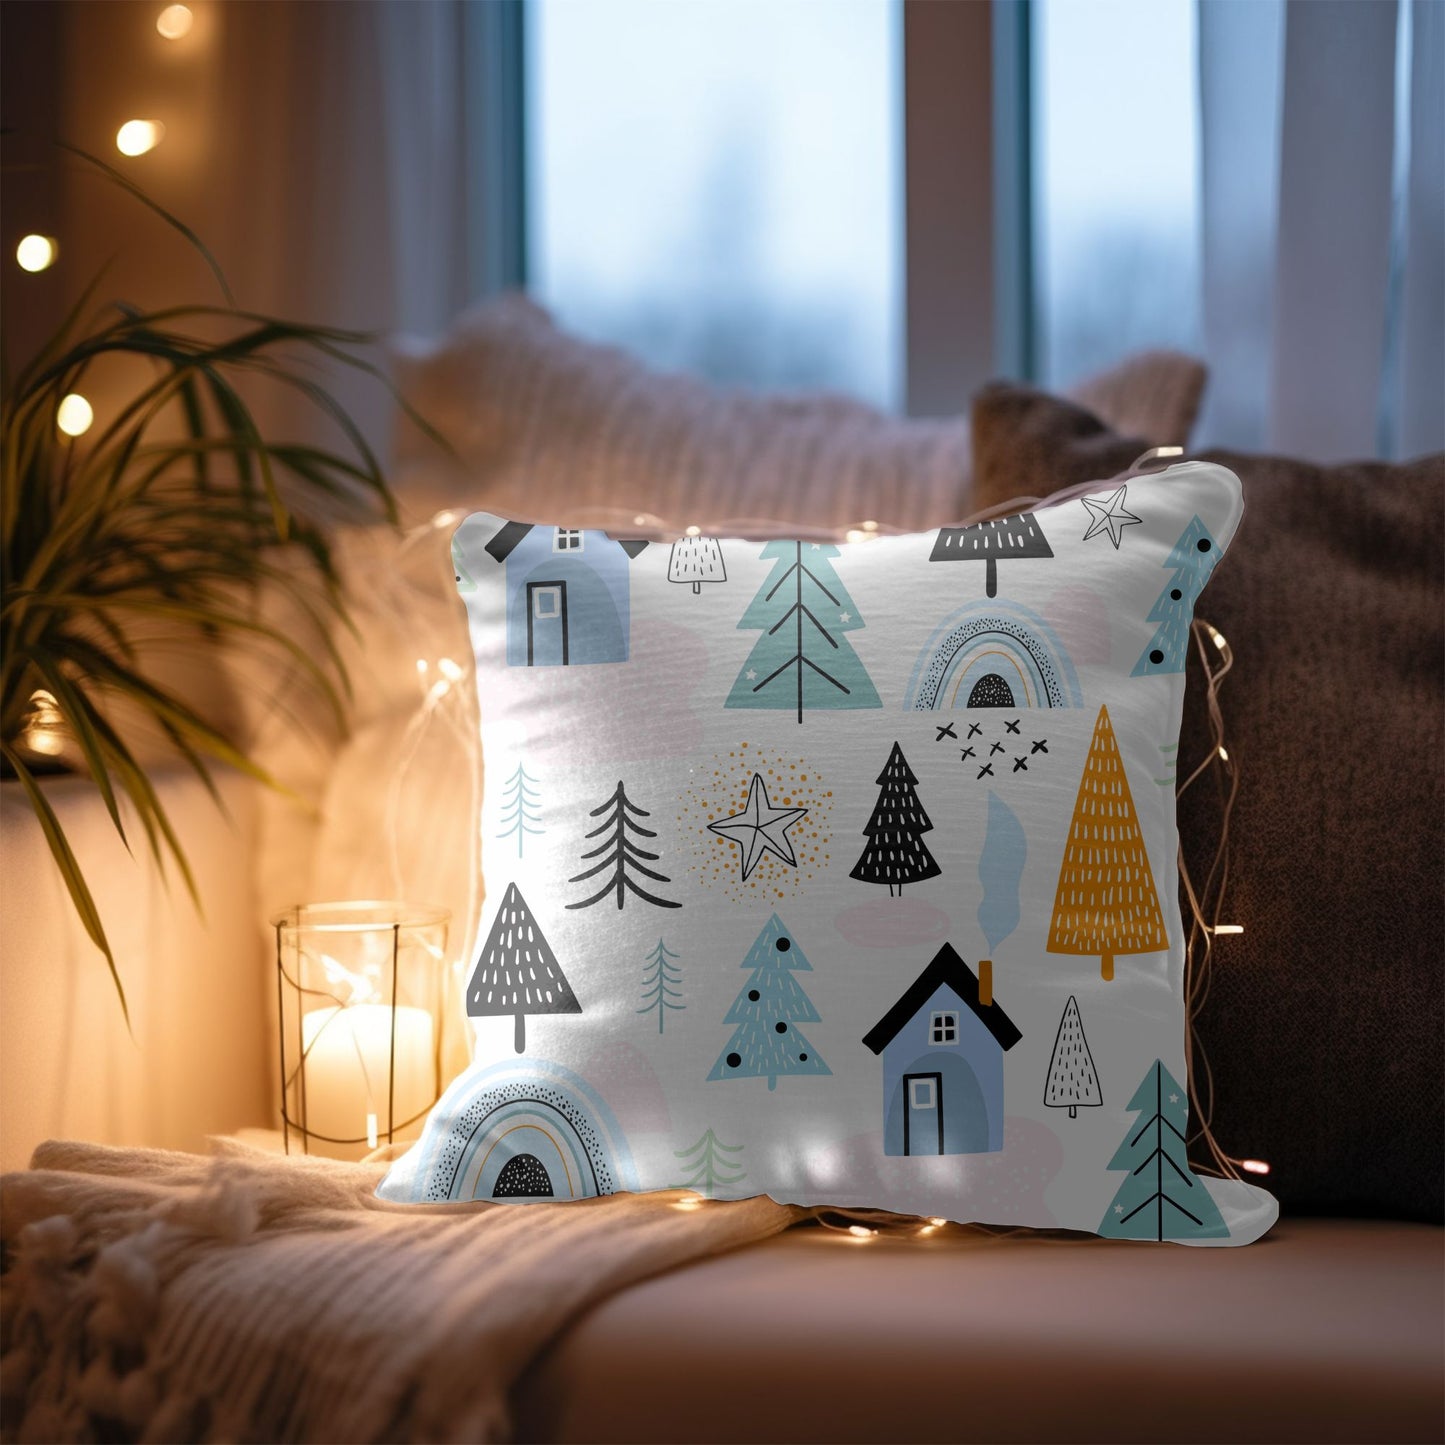 Christmas-Themed Decorative Pillow for a Cozy Atmosphere